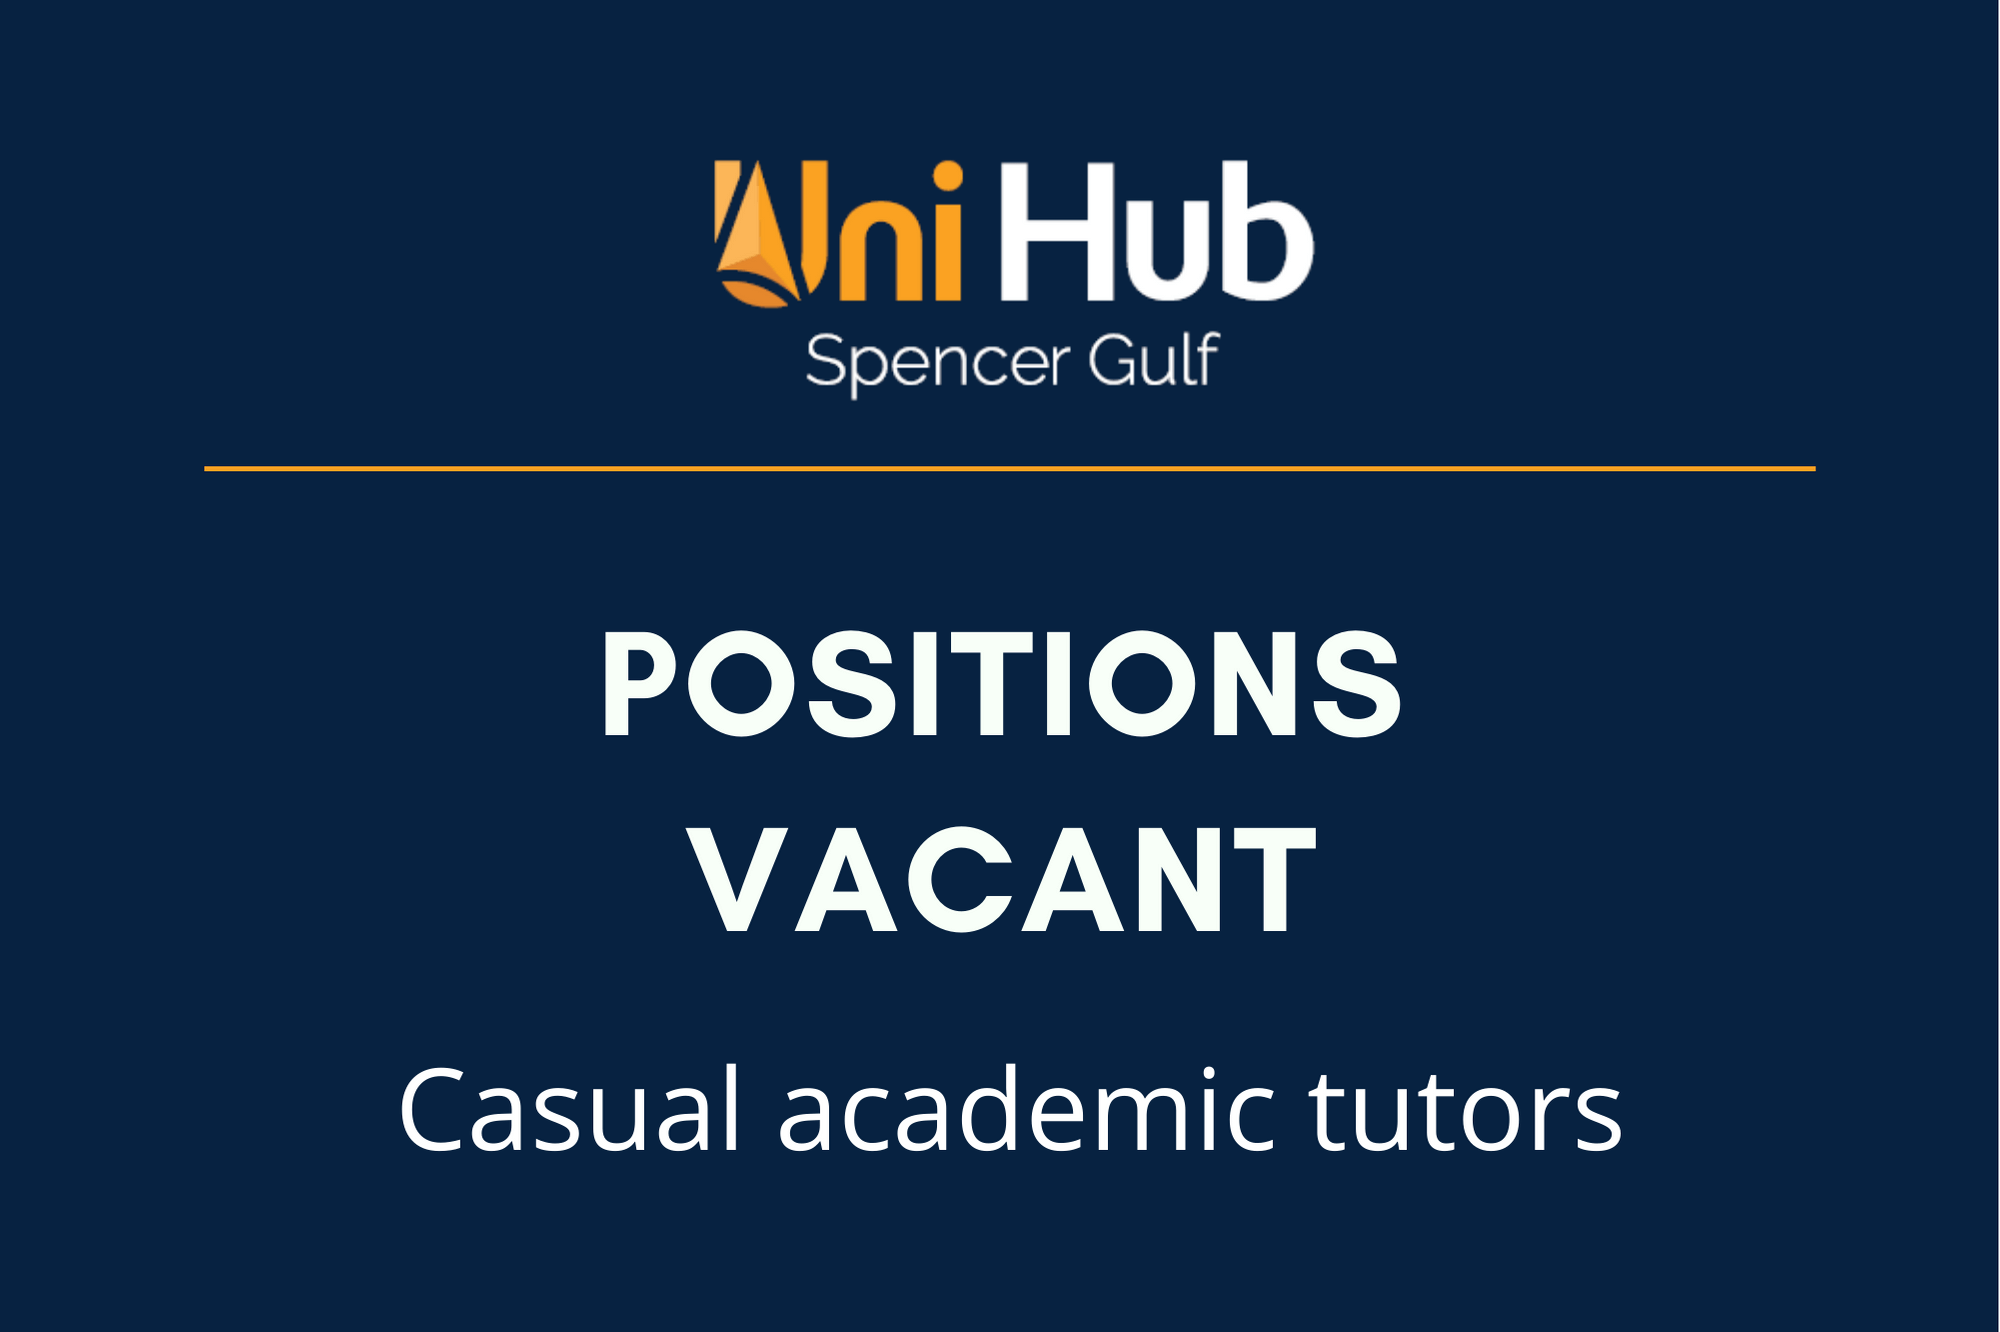 Positions vacant